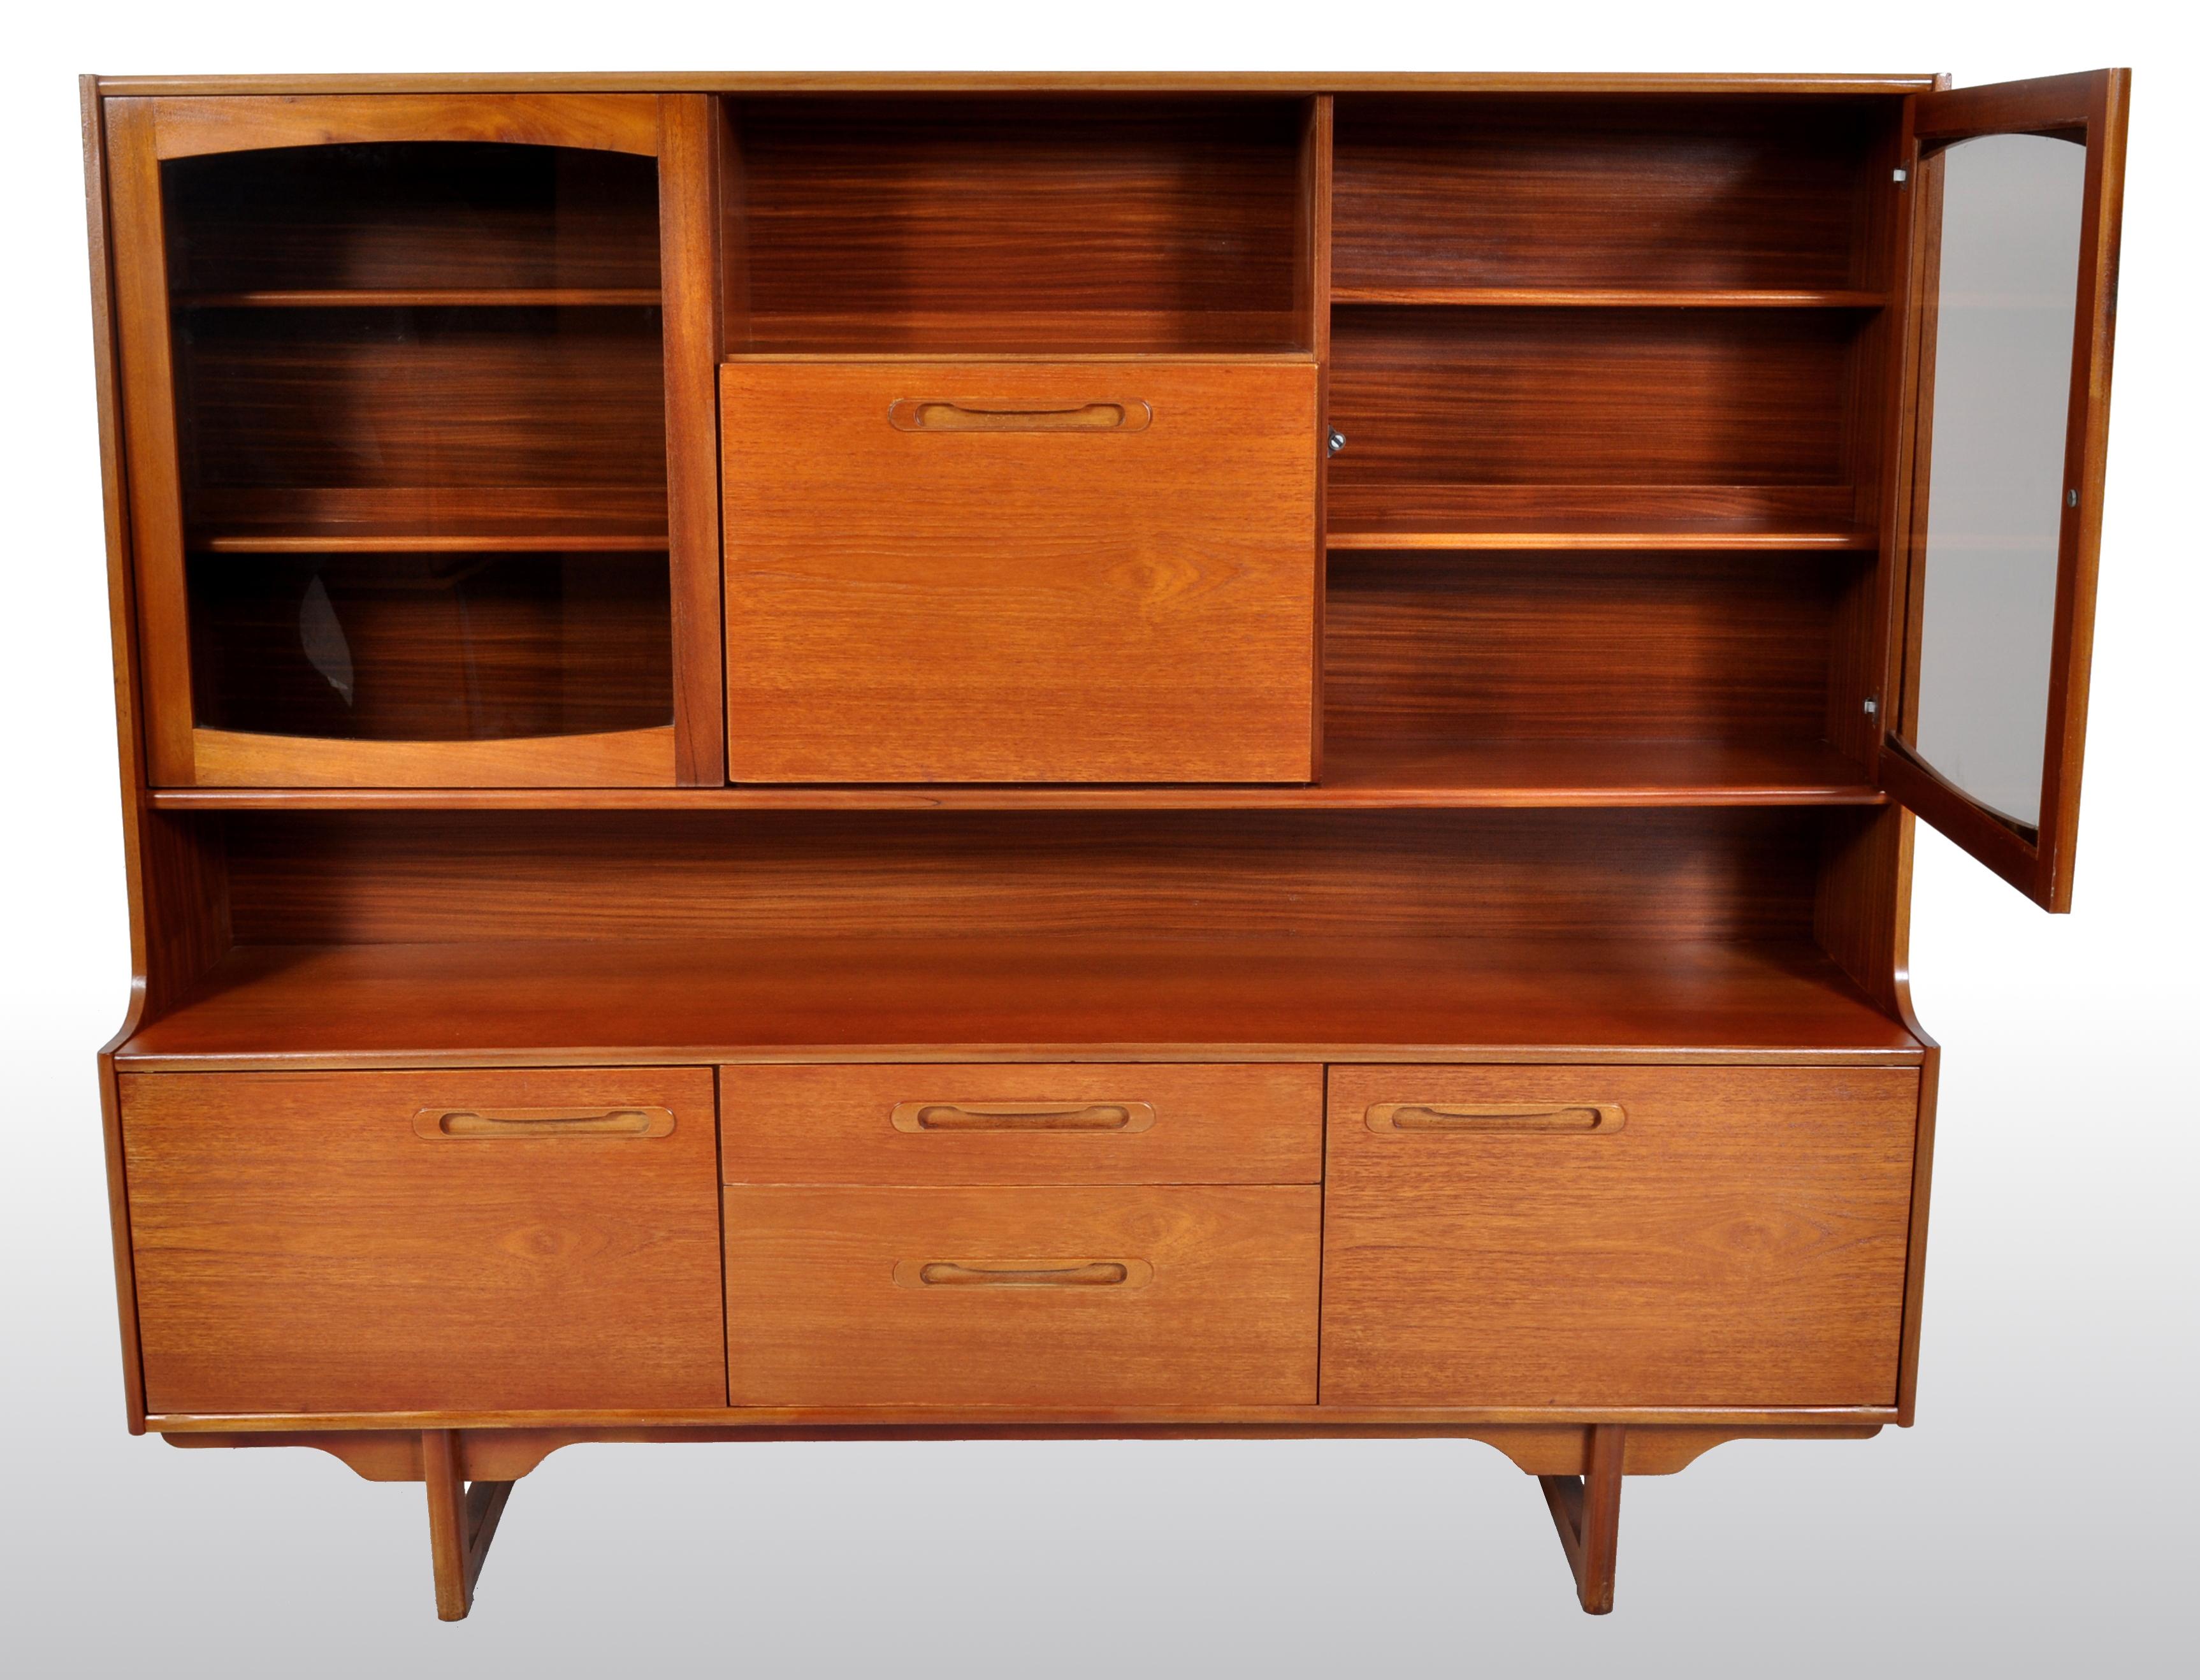 20th Century Mid-Century Modern Danish Style Twin Tier Credenza in Teak by Portwood, 1960s